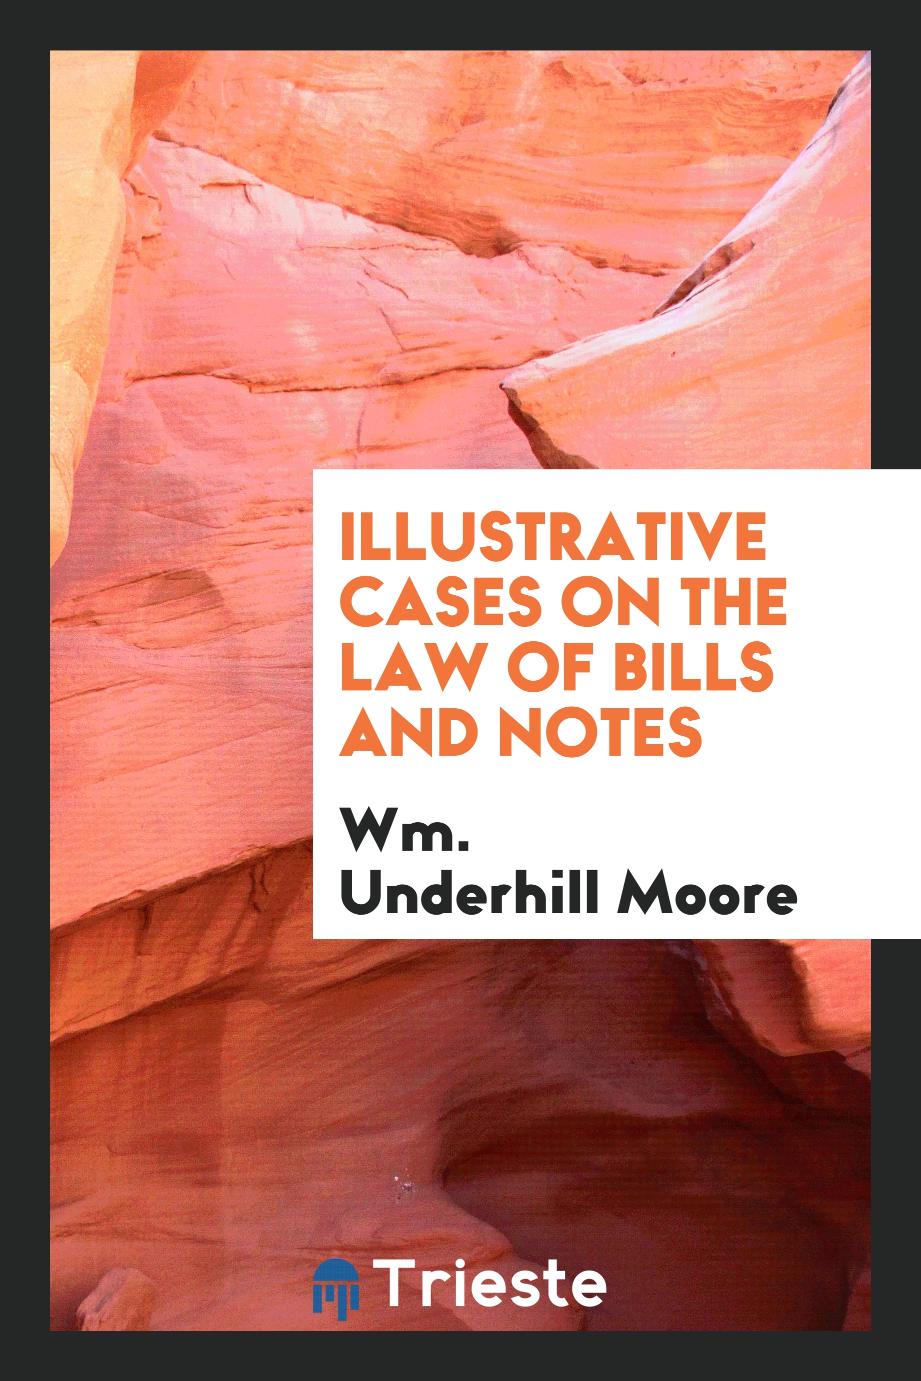 Illustrative cases on the law of bills and notes